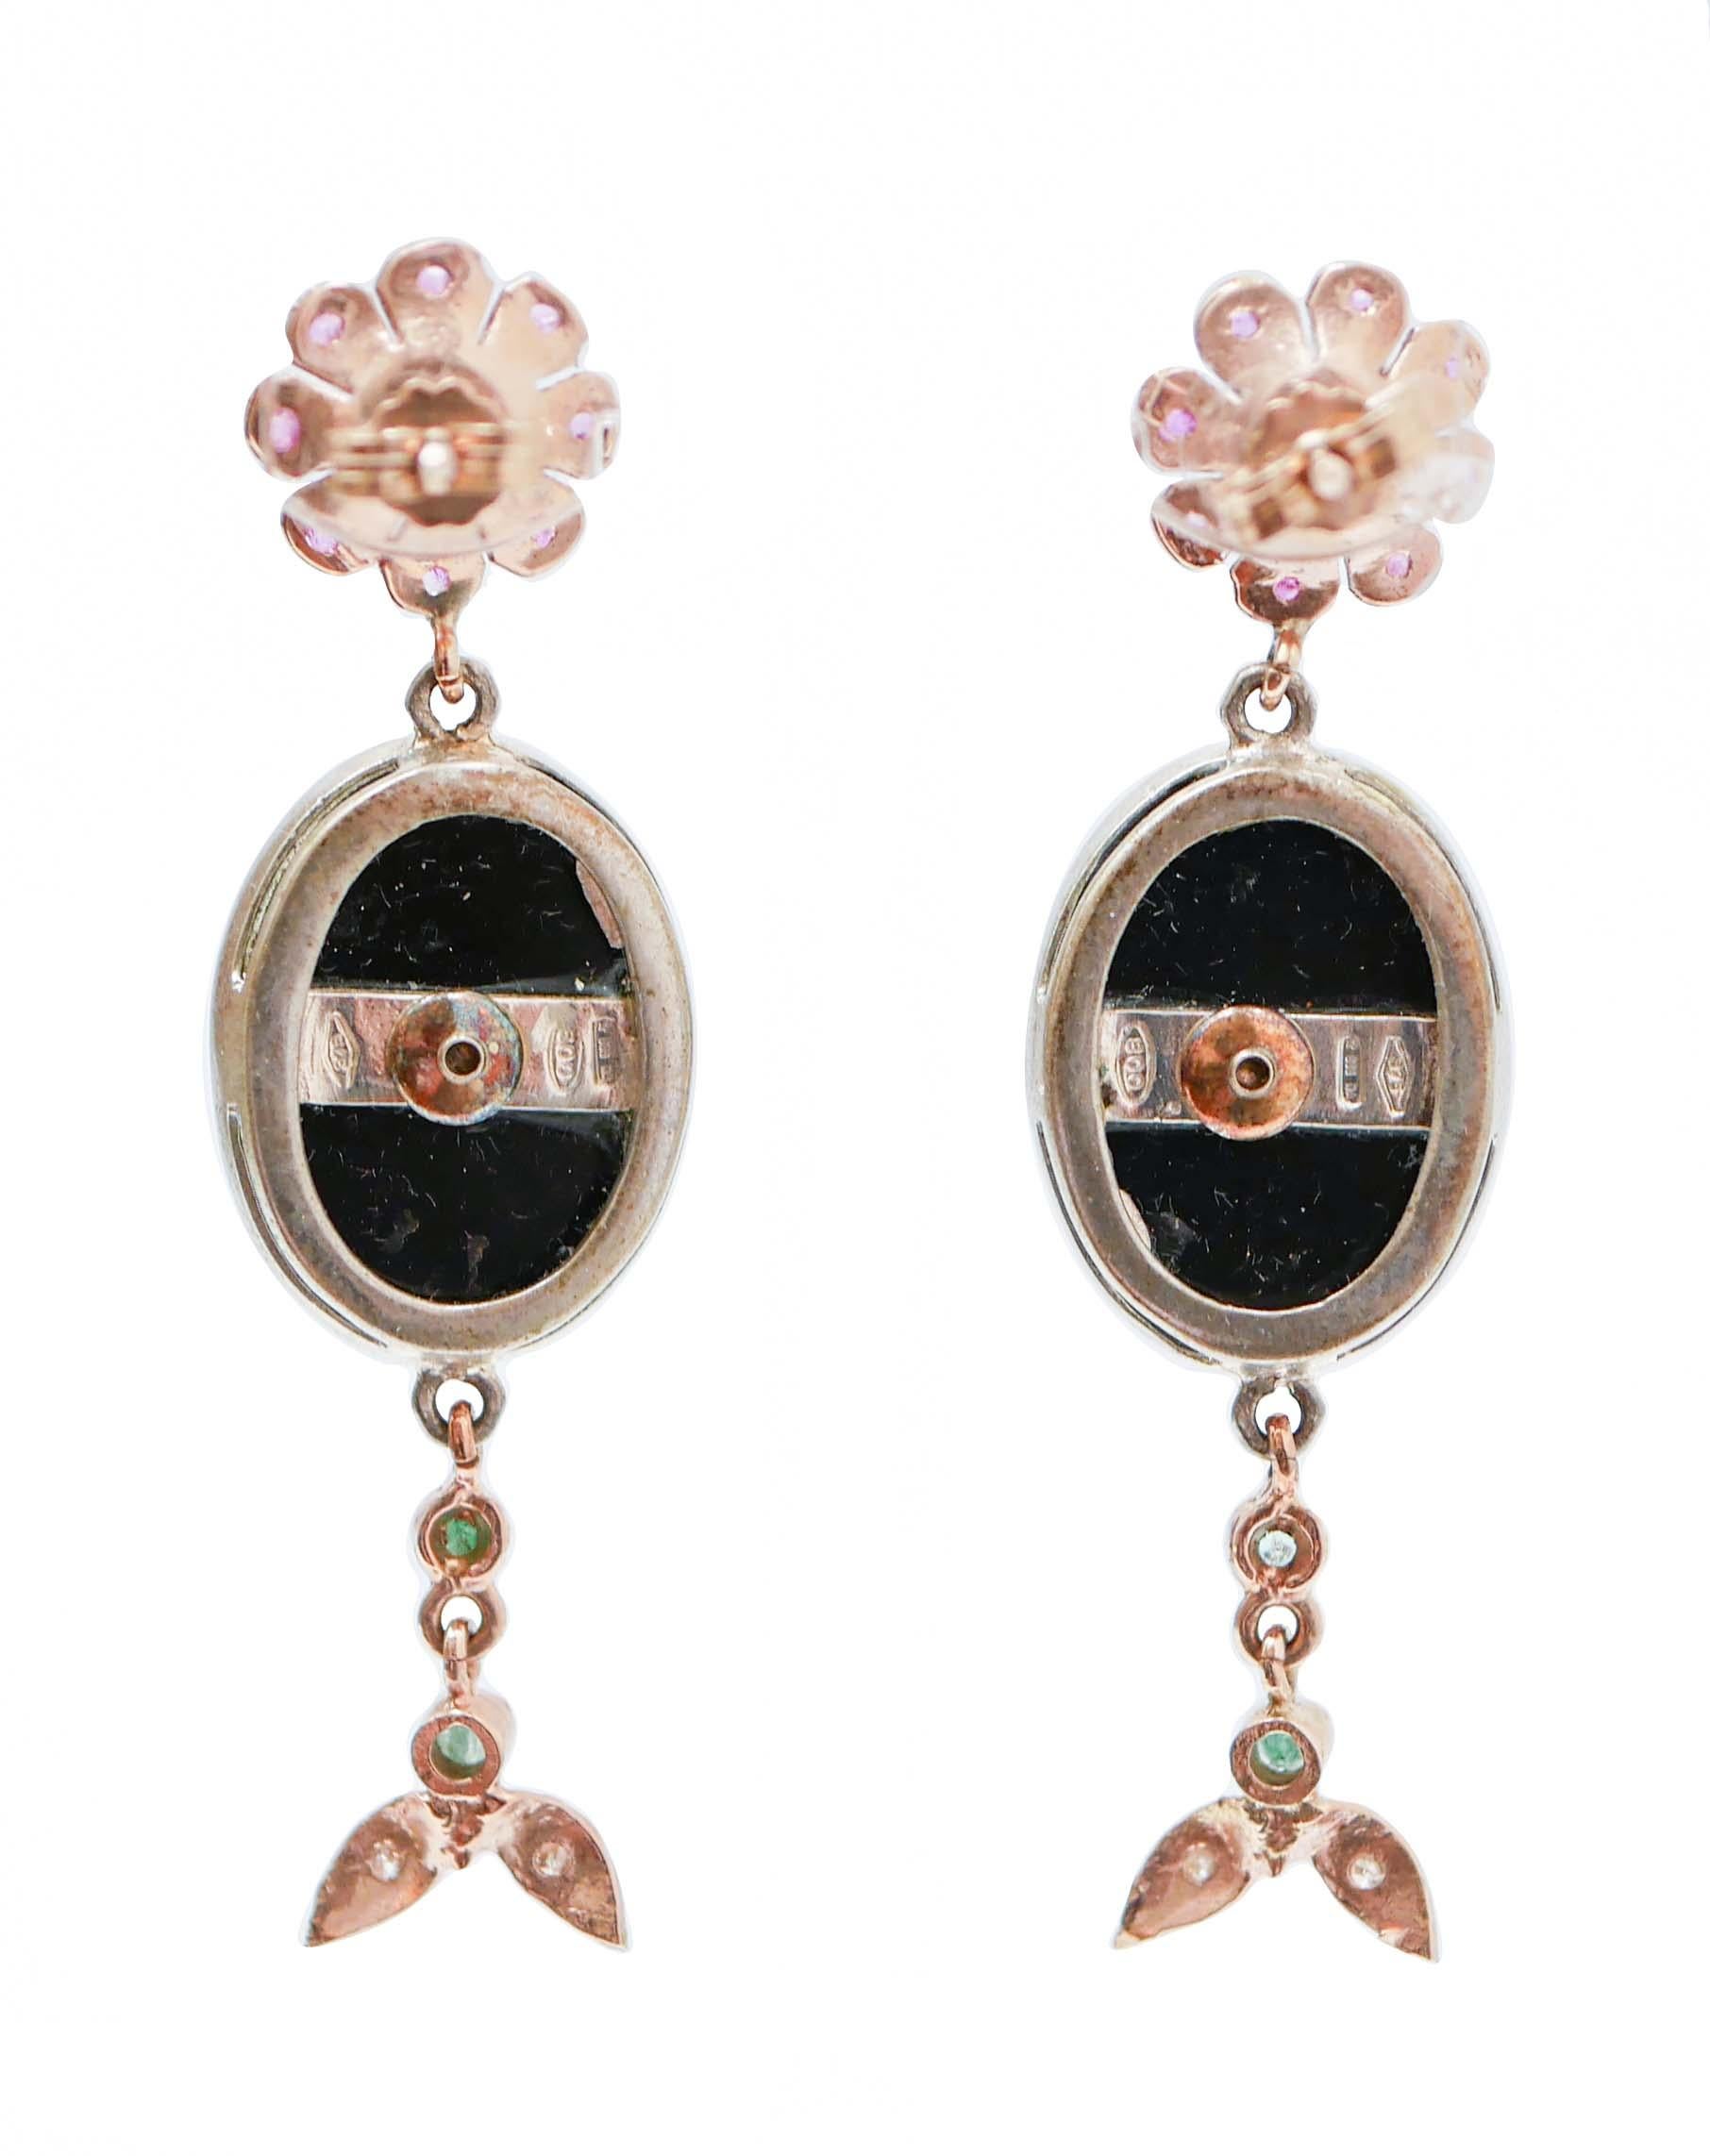 Retro Onyx, Emeralds, Rubies, Diamonds, Rose Gold and Silver Earrings. For Sale